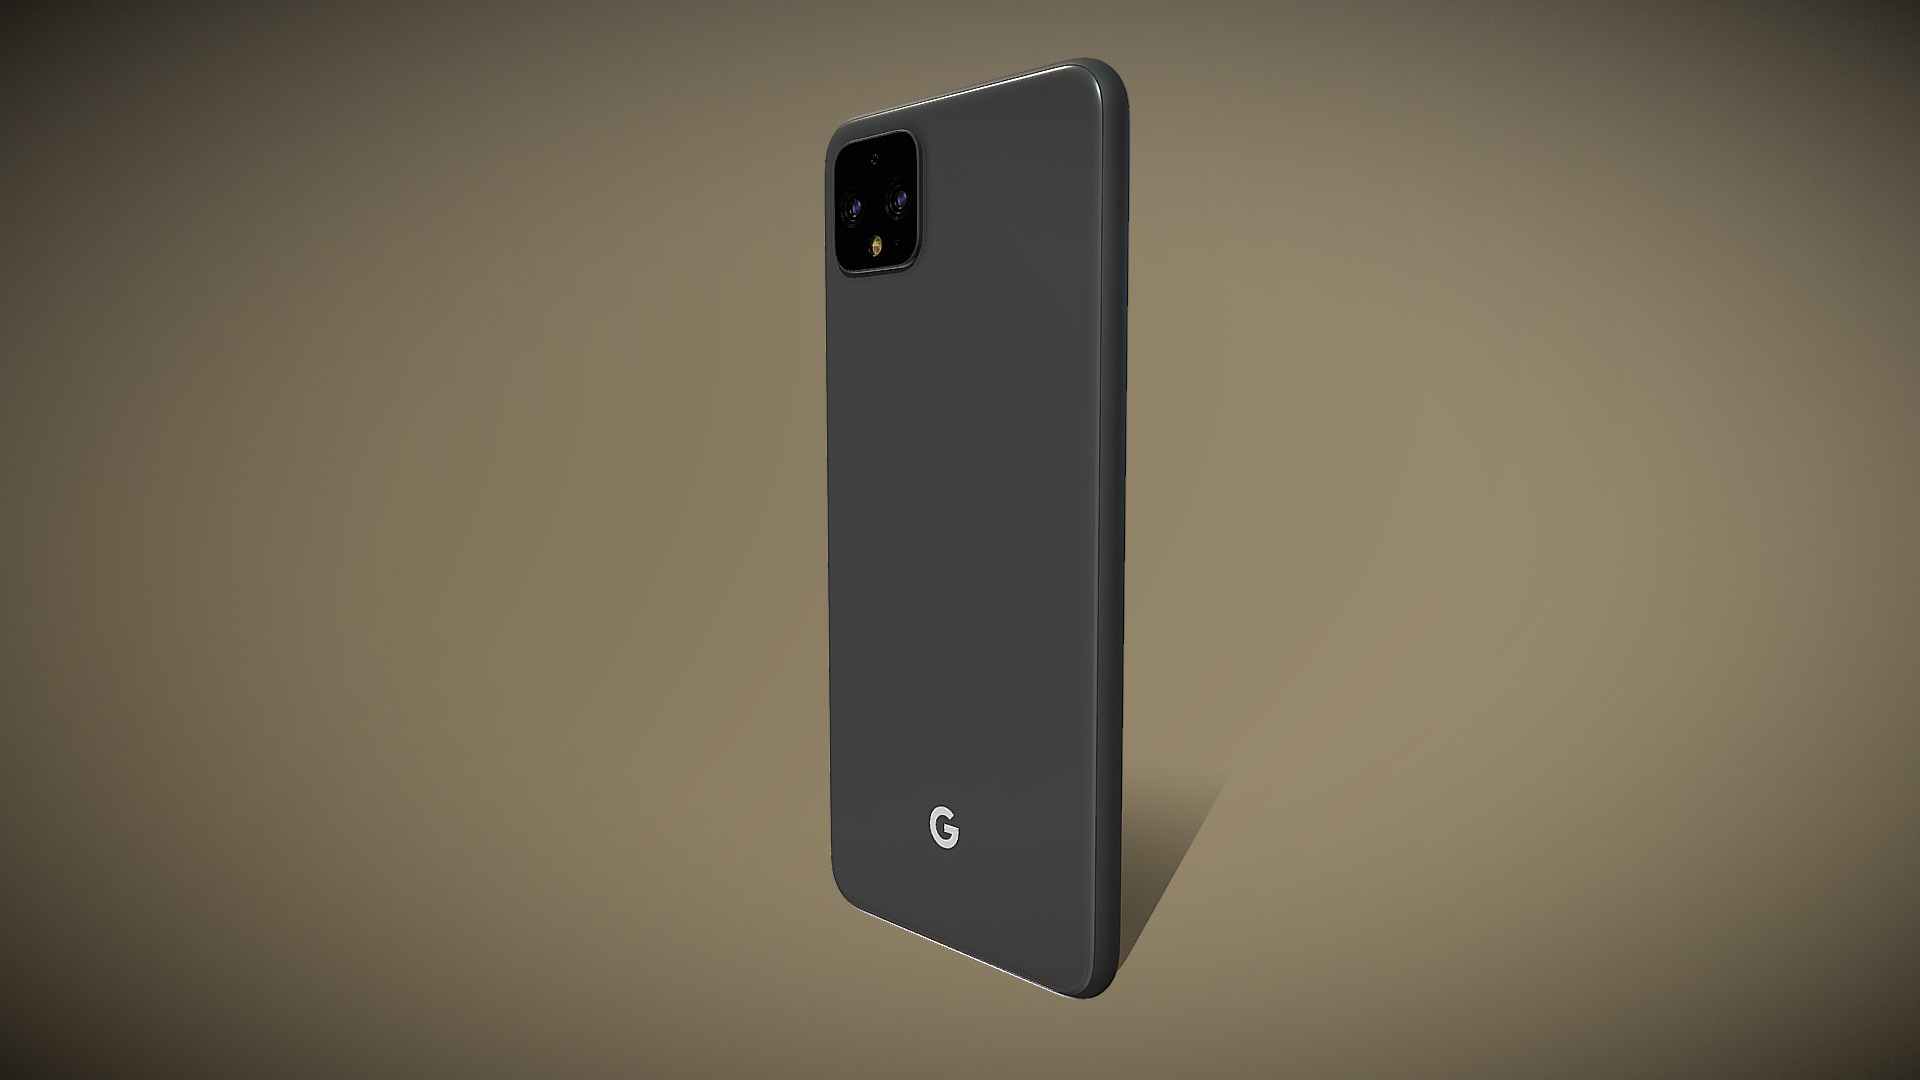 3D model Google Pixel 4XL smartphone - This is a 3D model of the Google Pixel 4XL smartphone. The 3D model is about a cell phone on a table.